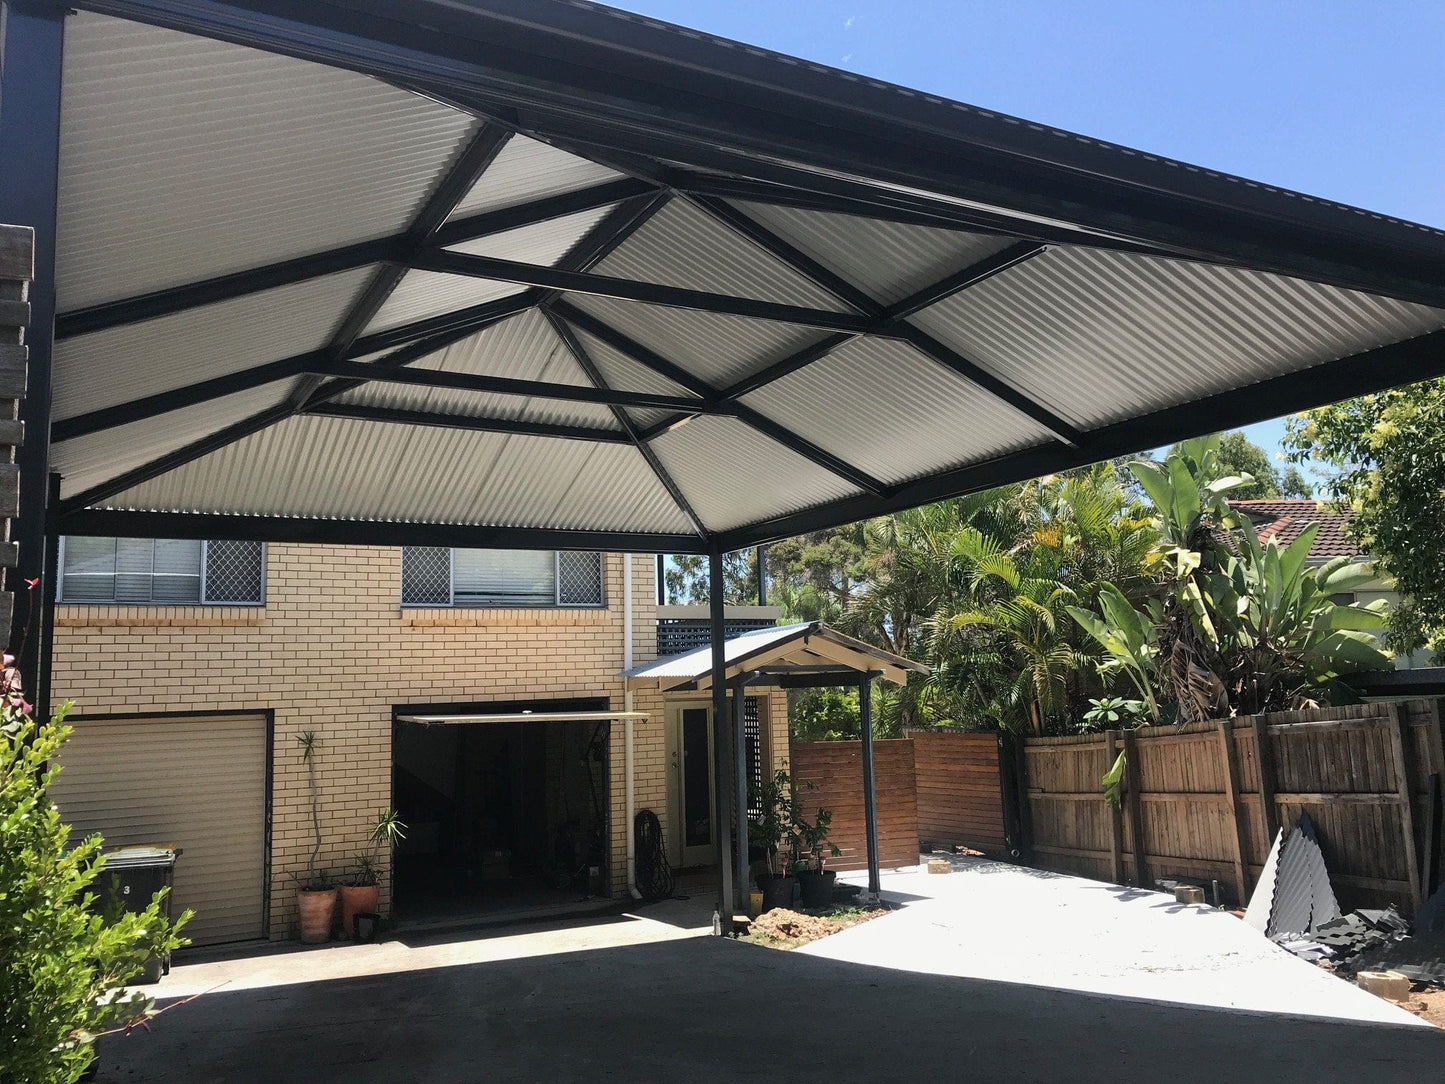 Insulated Gable Patio - 9m x 6m - Supply & Install QHI National